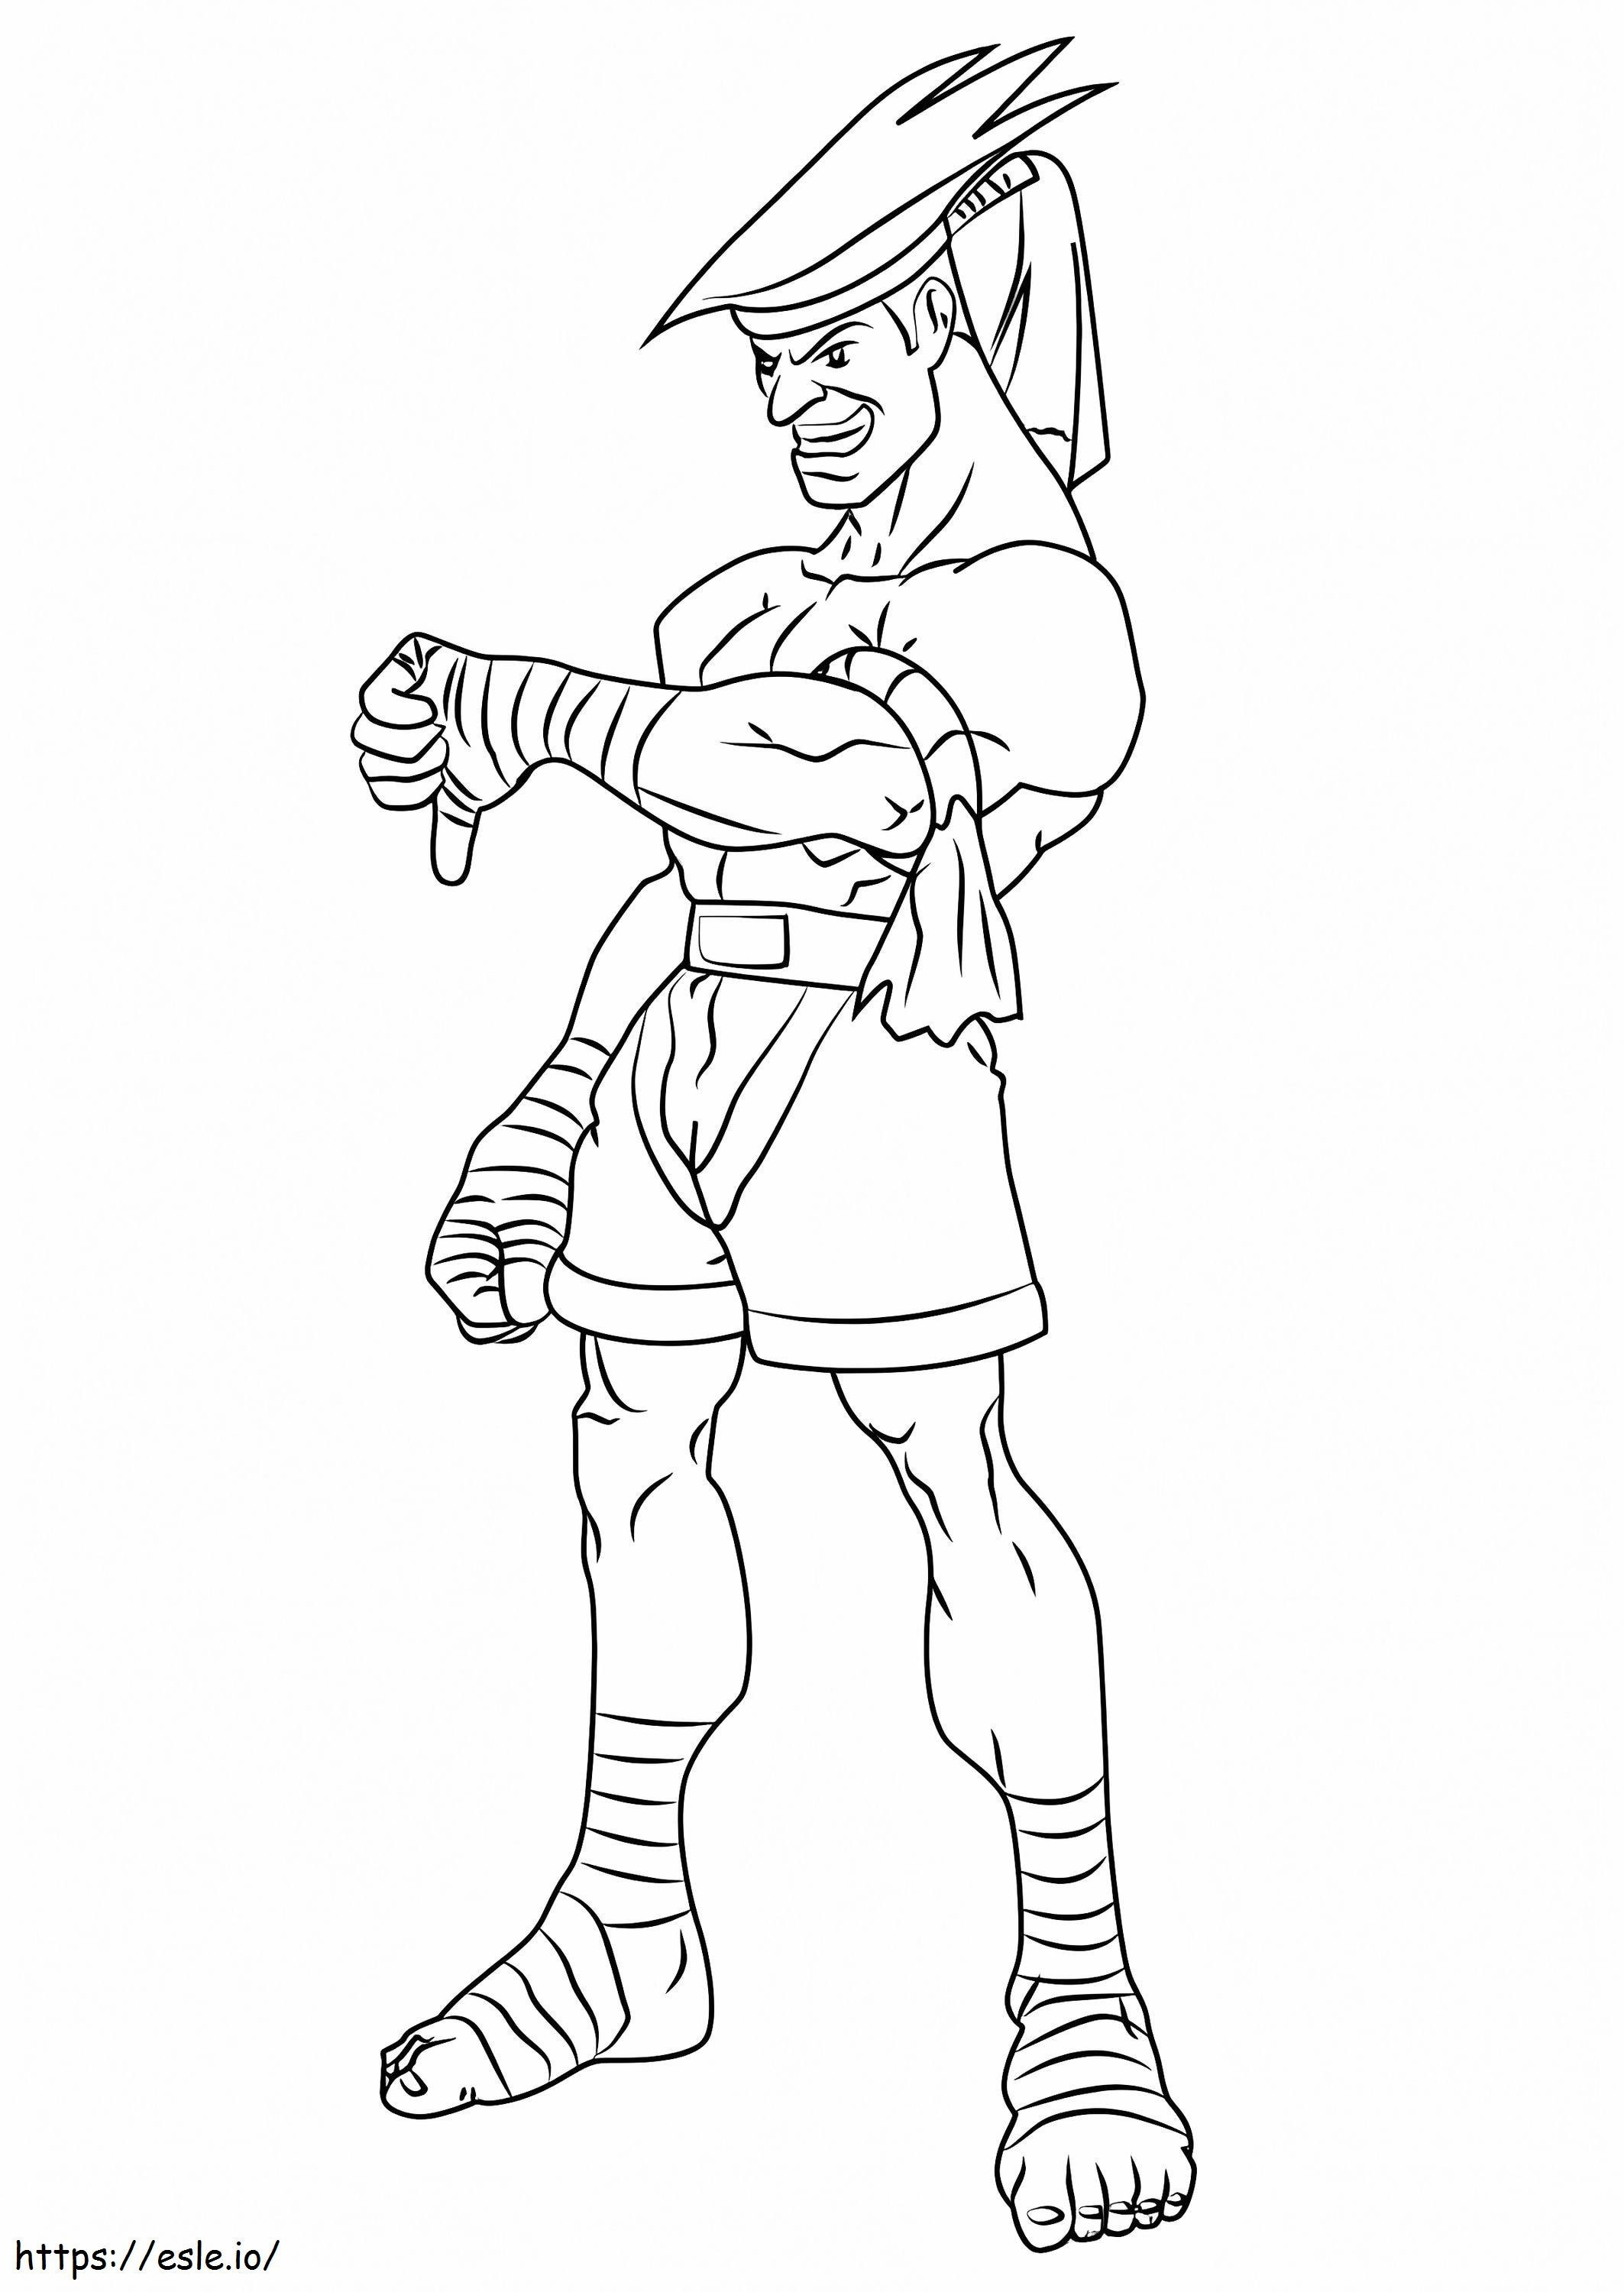 Adon From Street Fighter coloring page